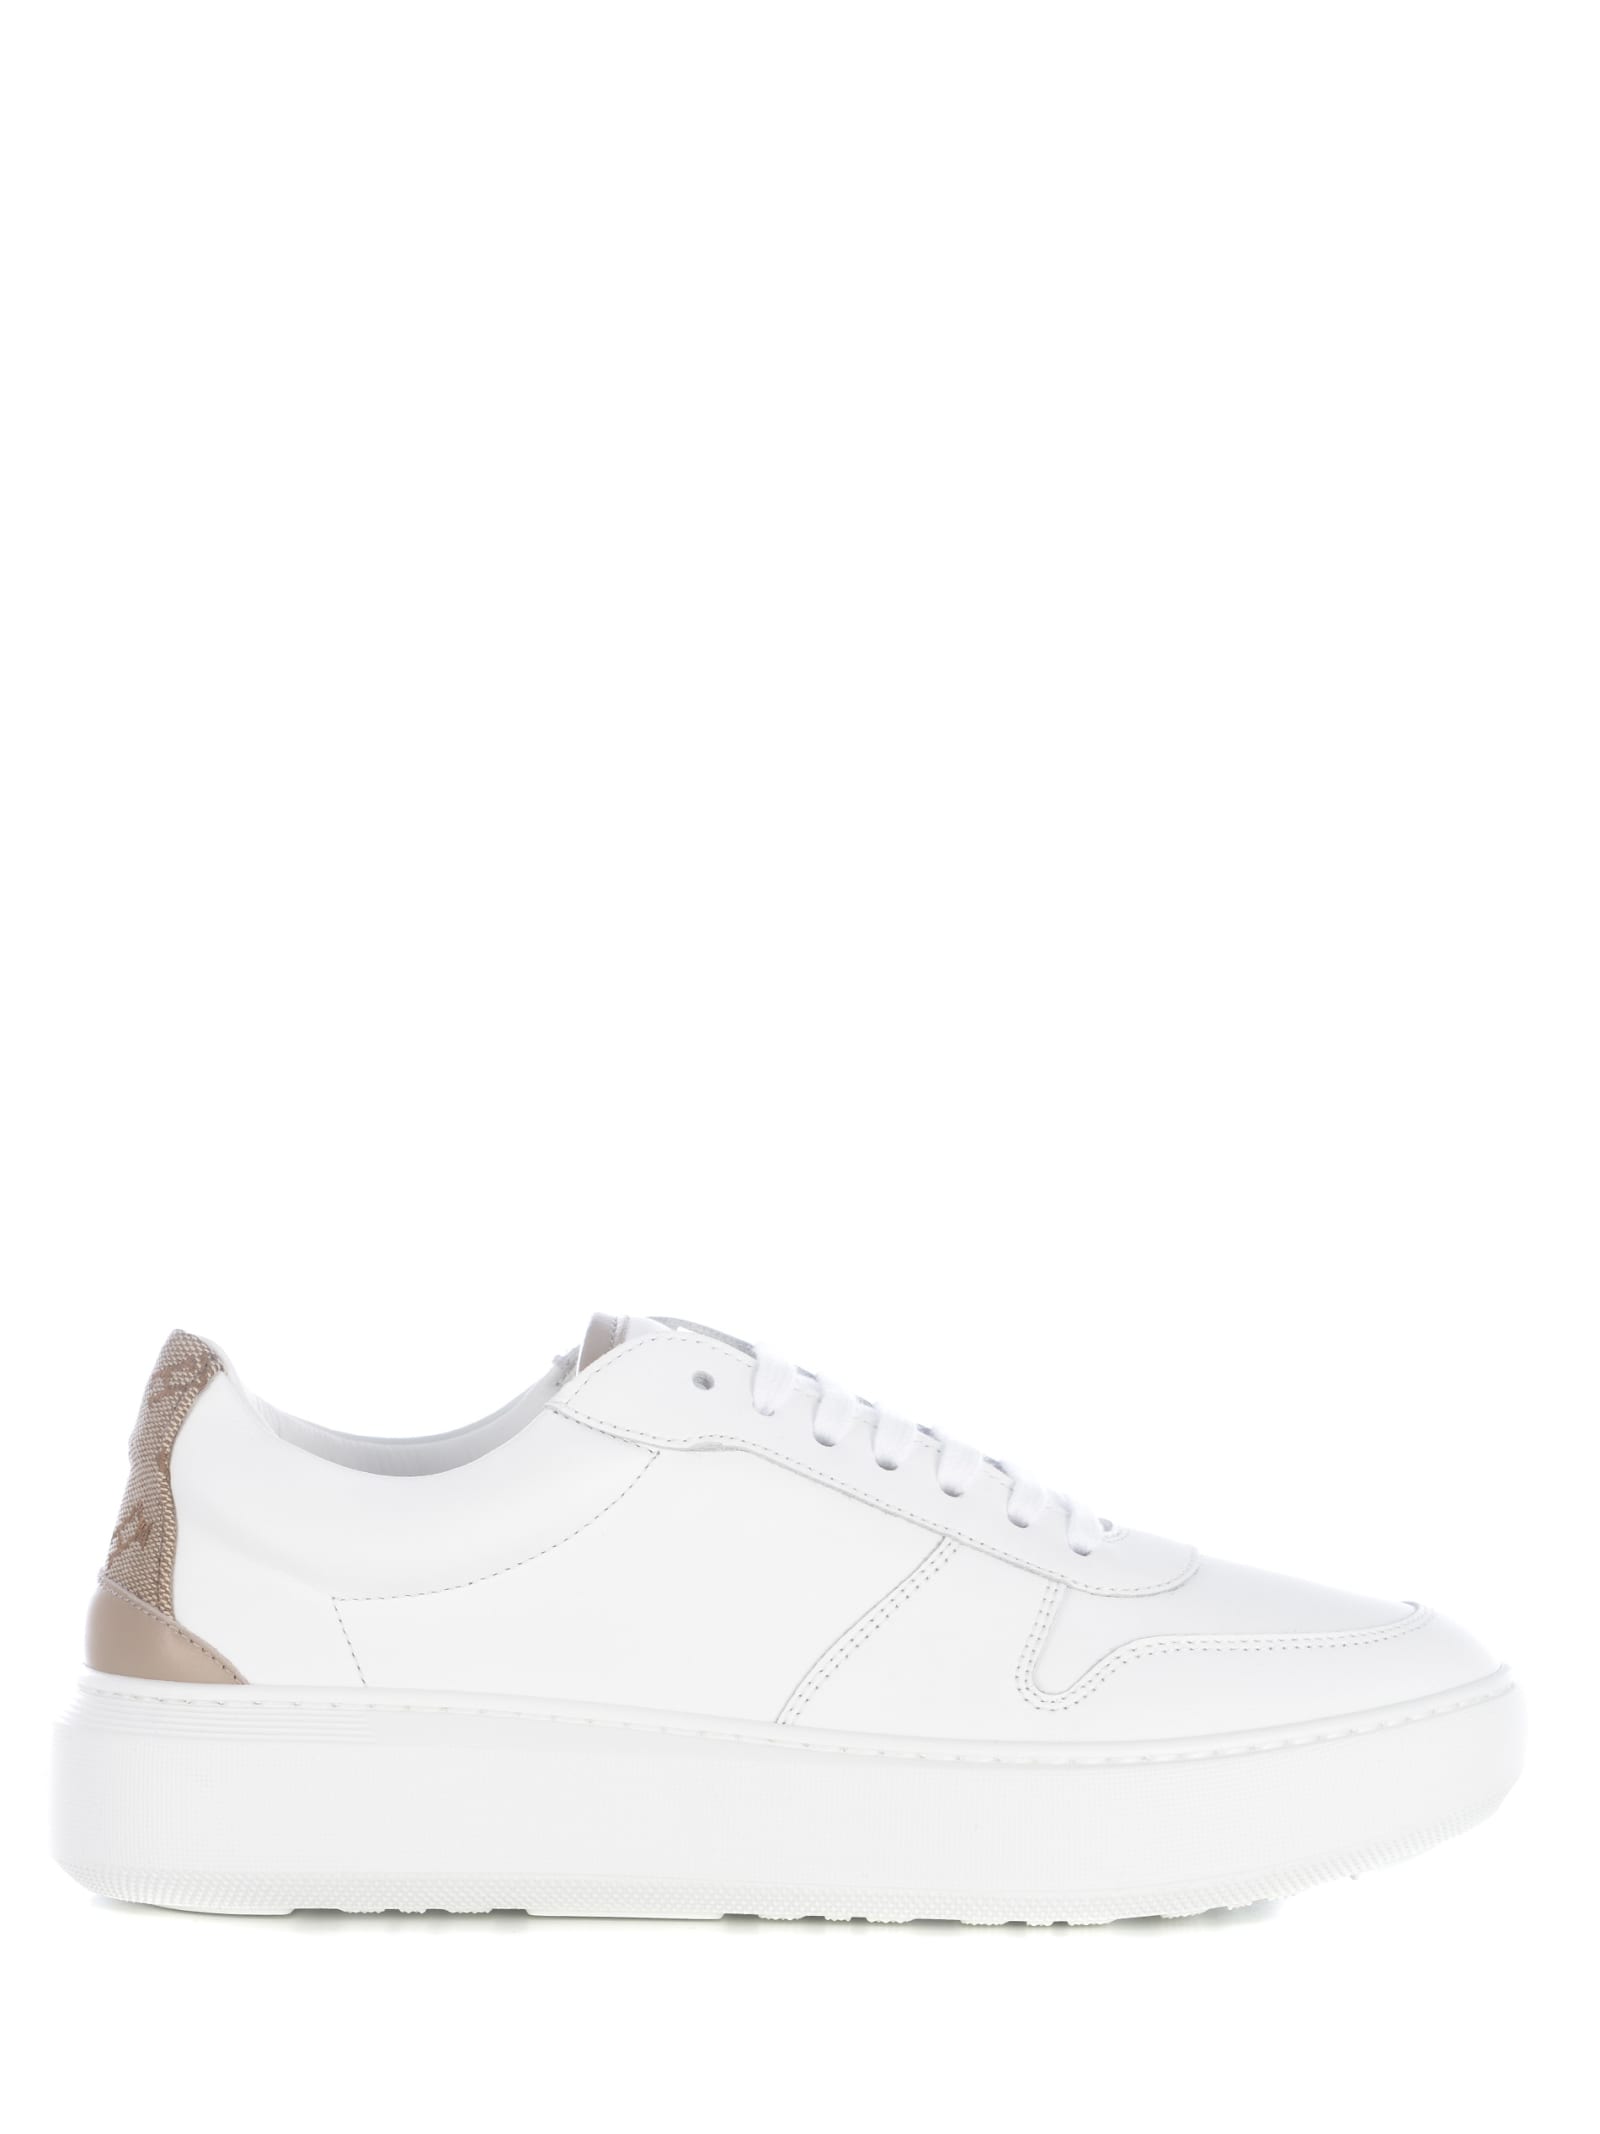 HERNO SNEAKERS HERNO MONOGRAM IN LEATHER